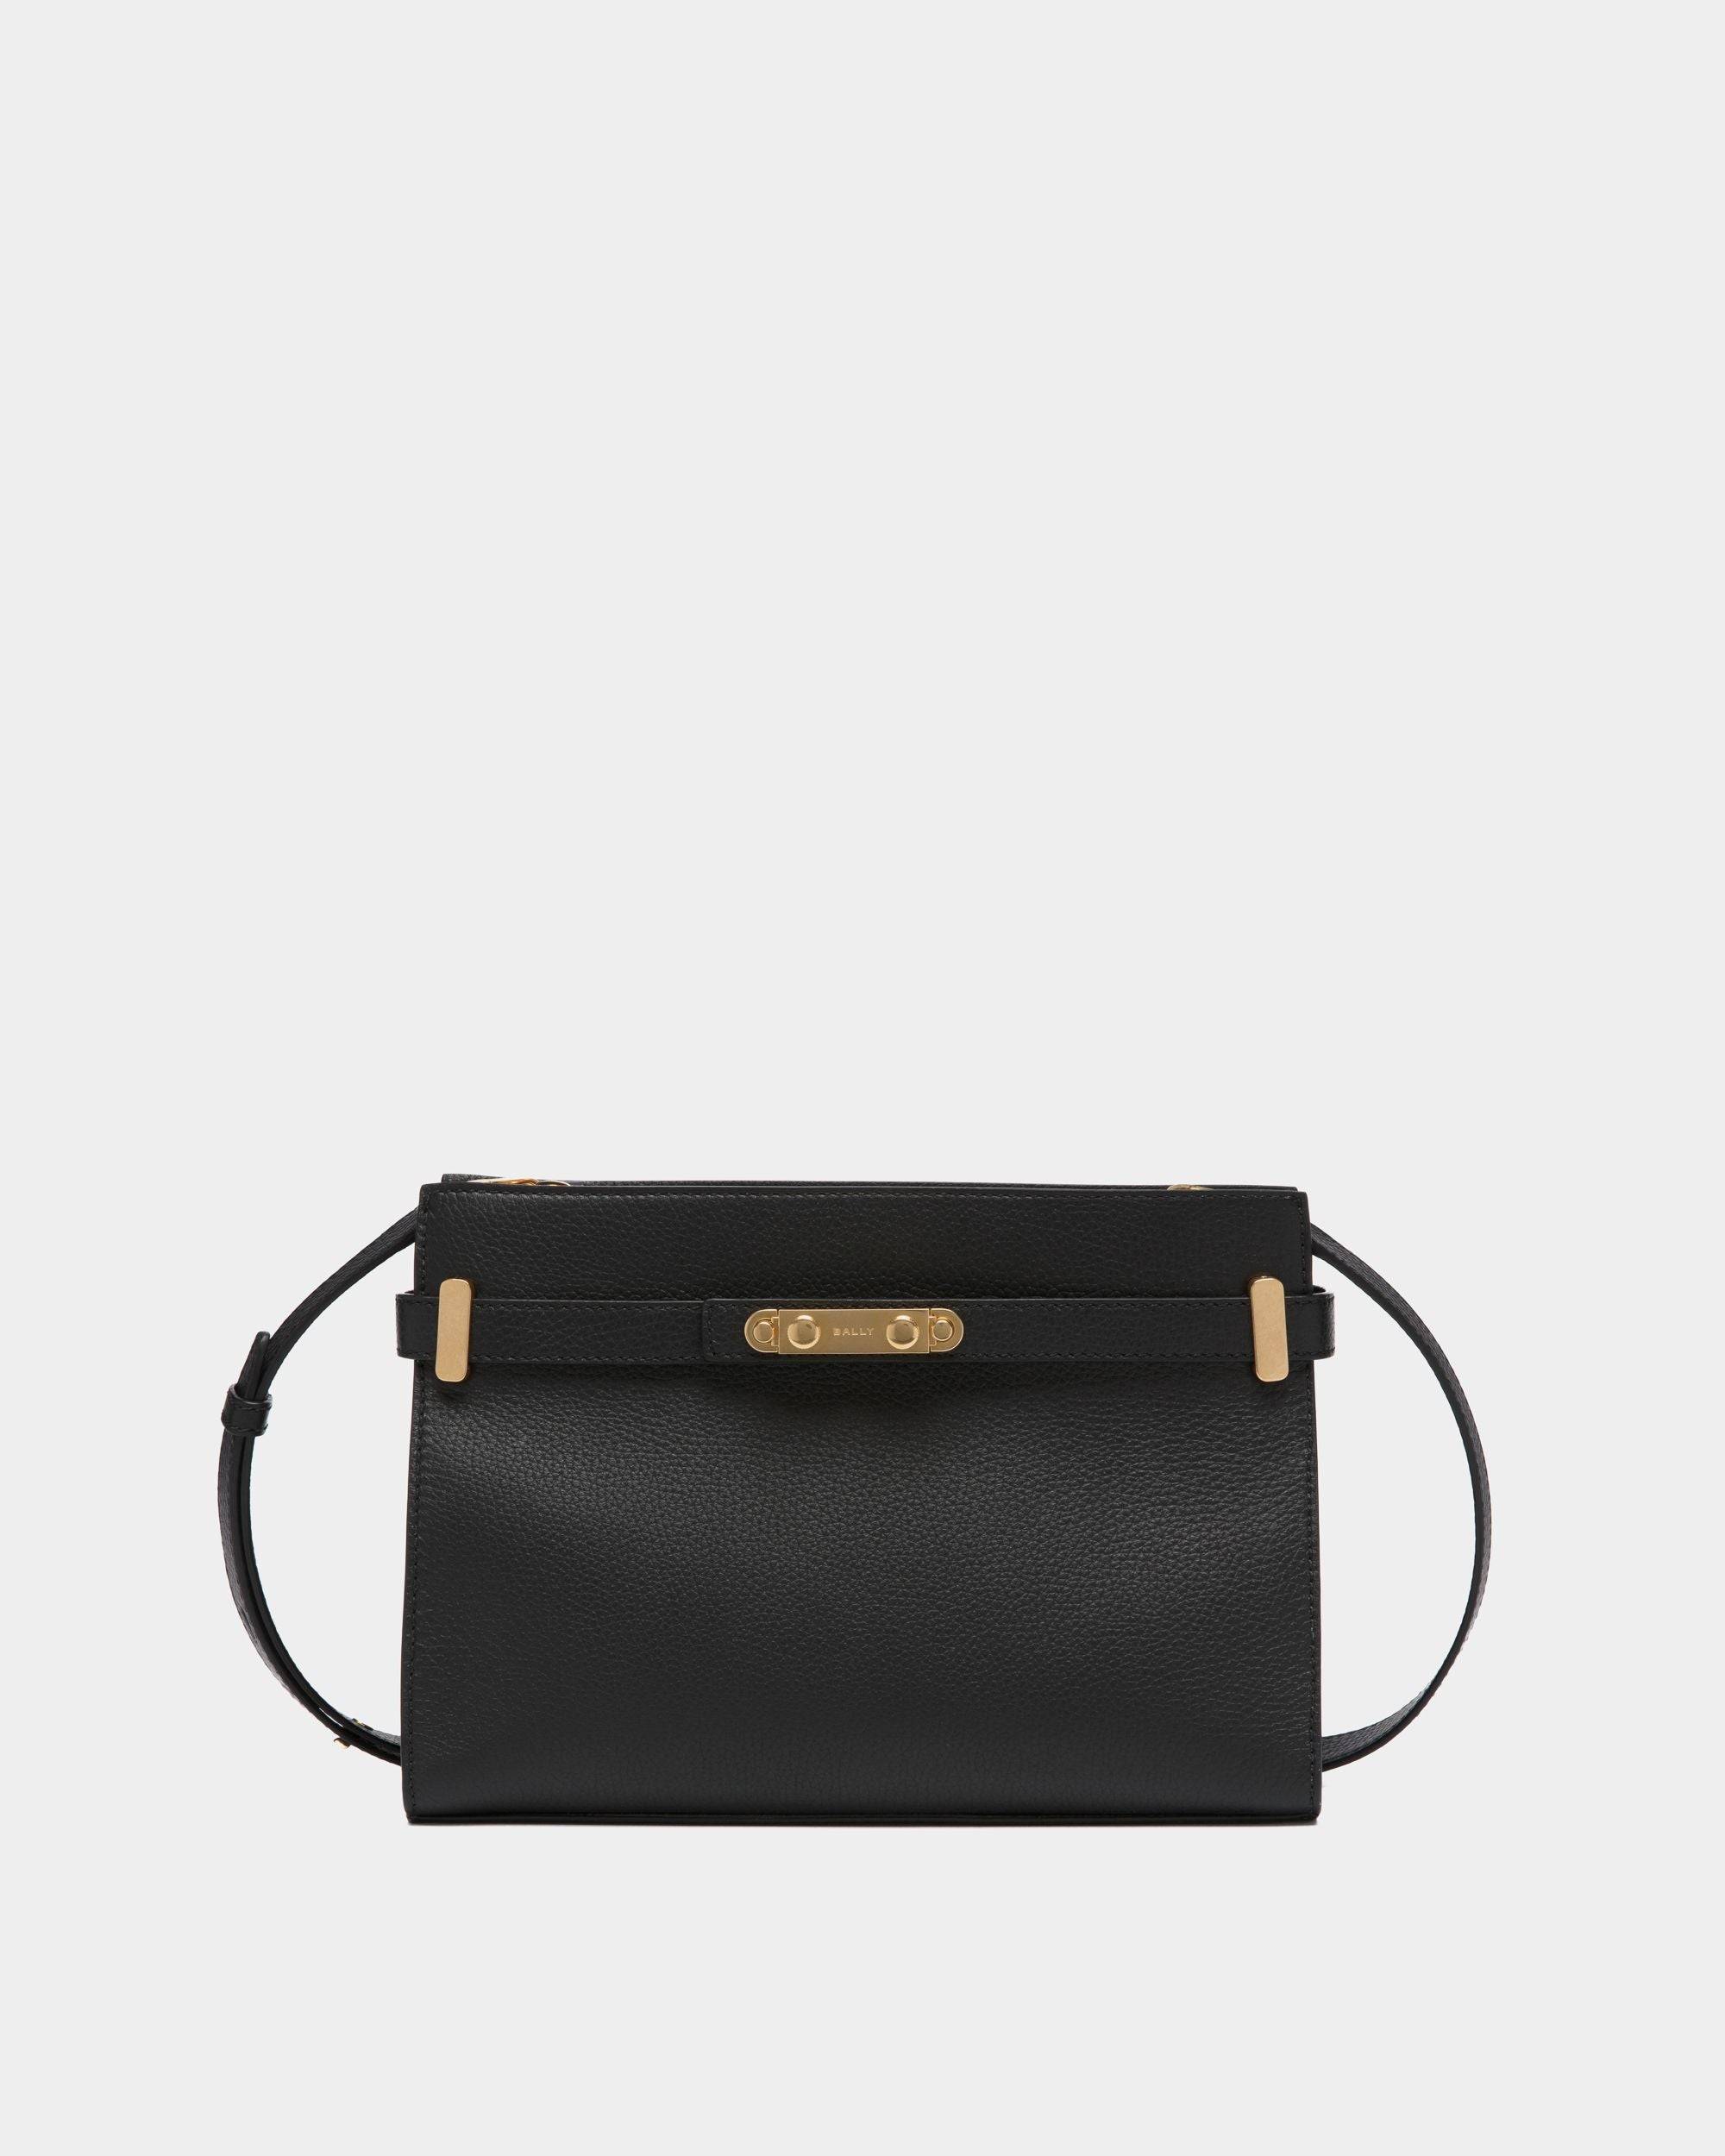 Women's Carriage Shoulder Bag in Black Grained Leather | Bally | Still Life Front